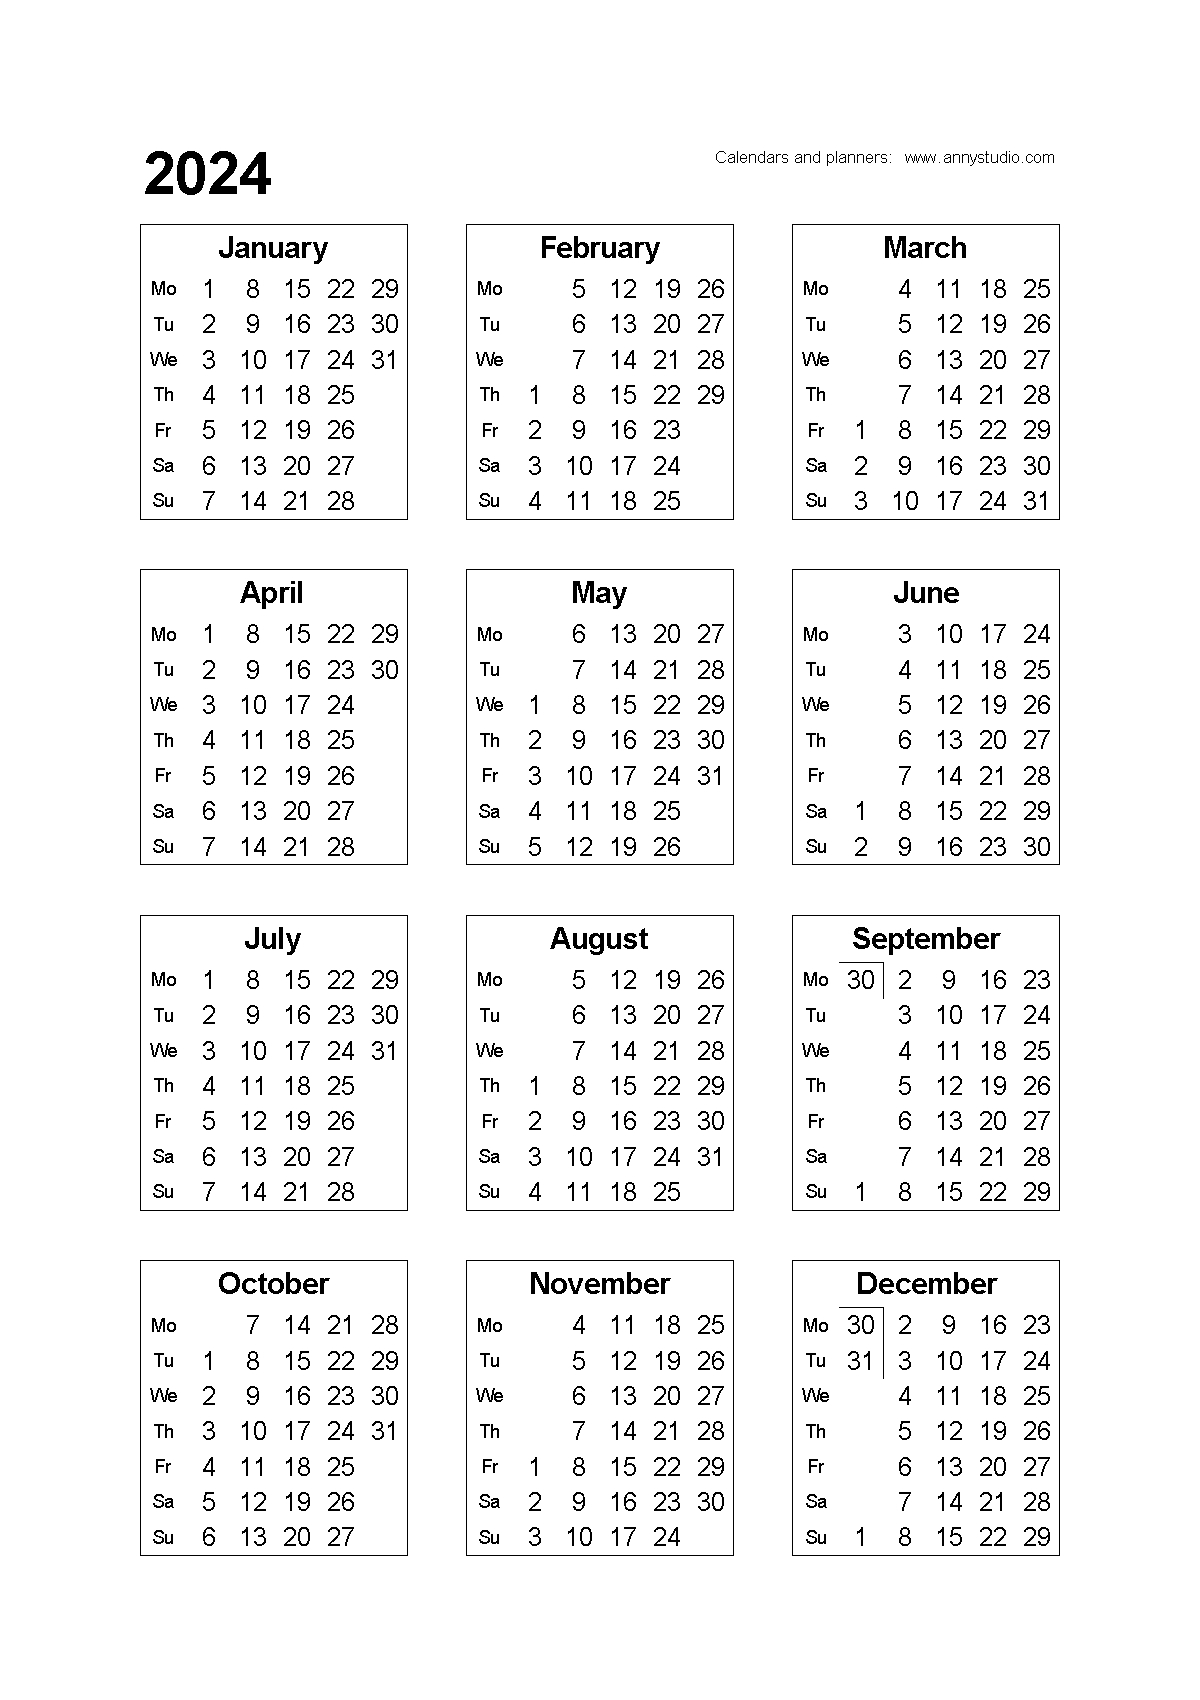 Free Printable Calendars And Planners 2023 And 2024 | Free | 2024 Printable Calendar By Month Australia